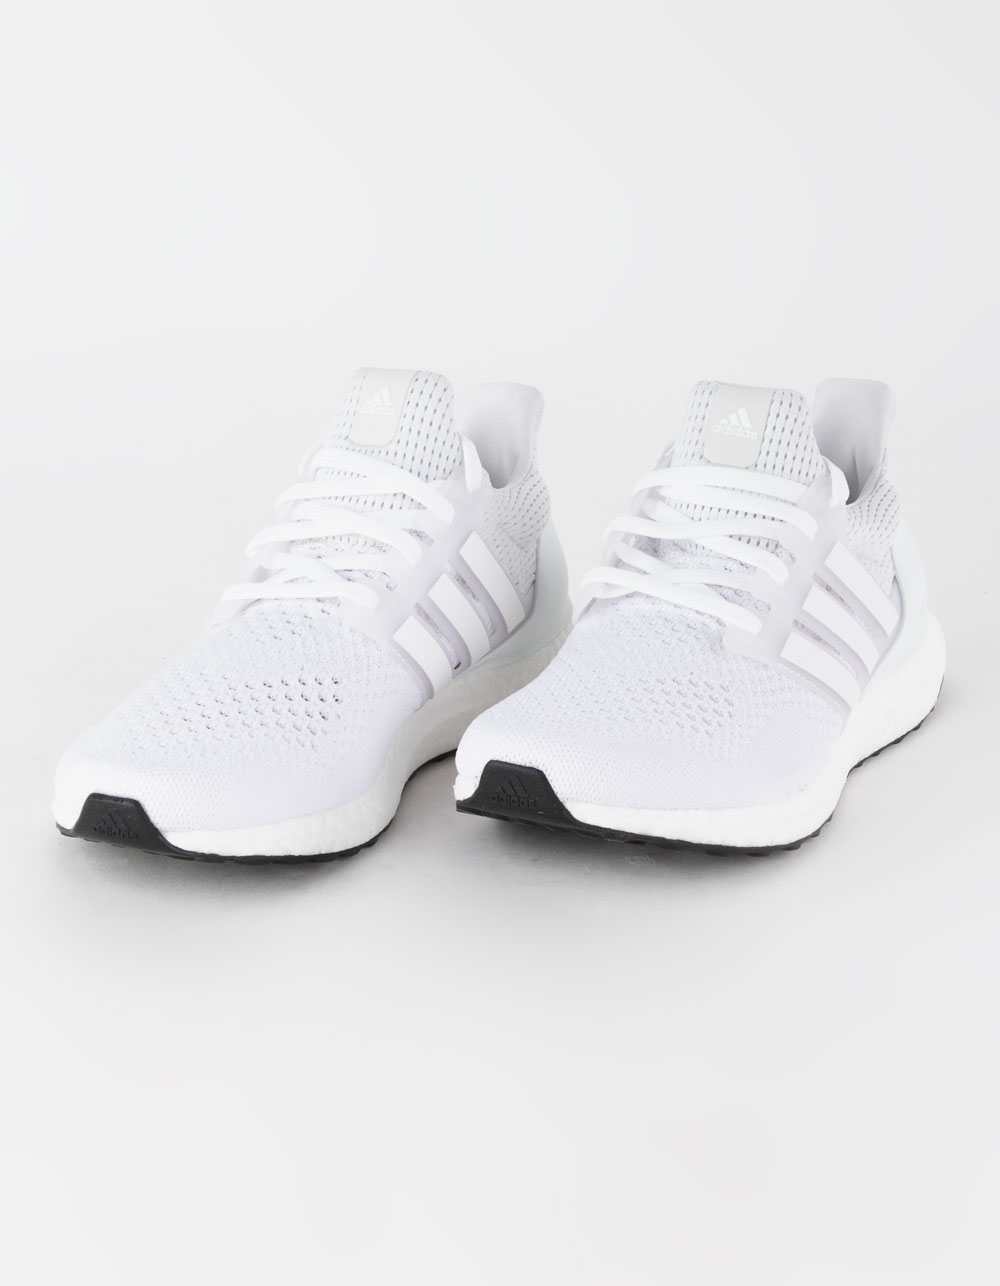 ADIDAS Ultraboost 1.0 Mens Shoes - WHITE Tillys